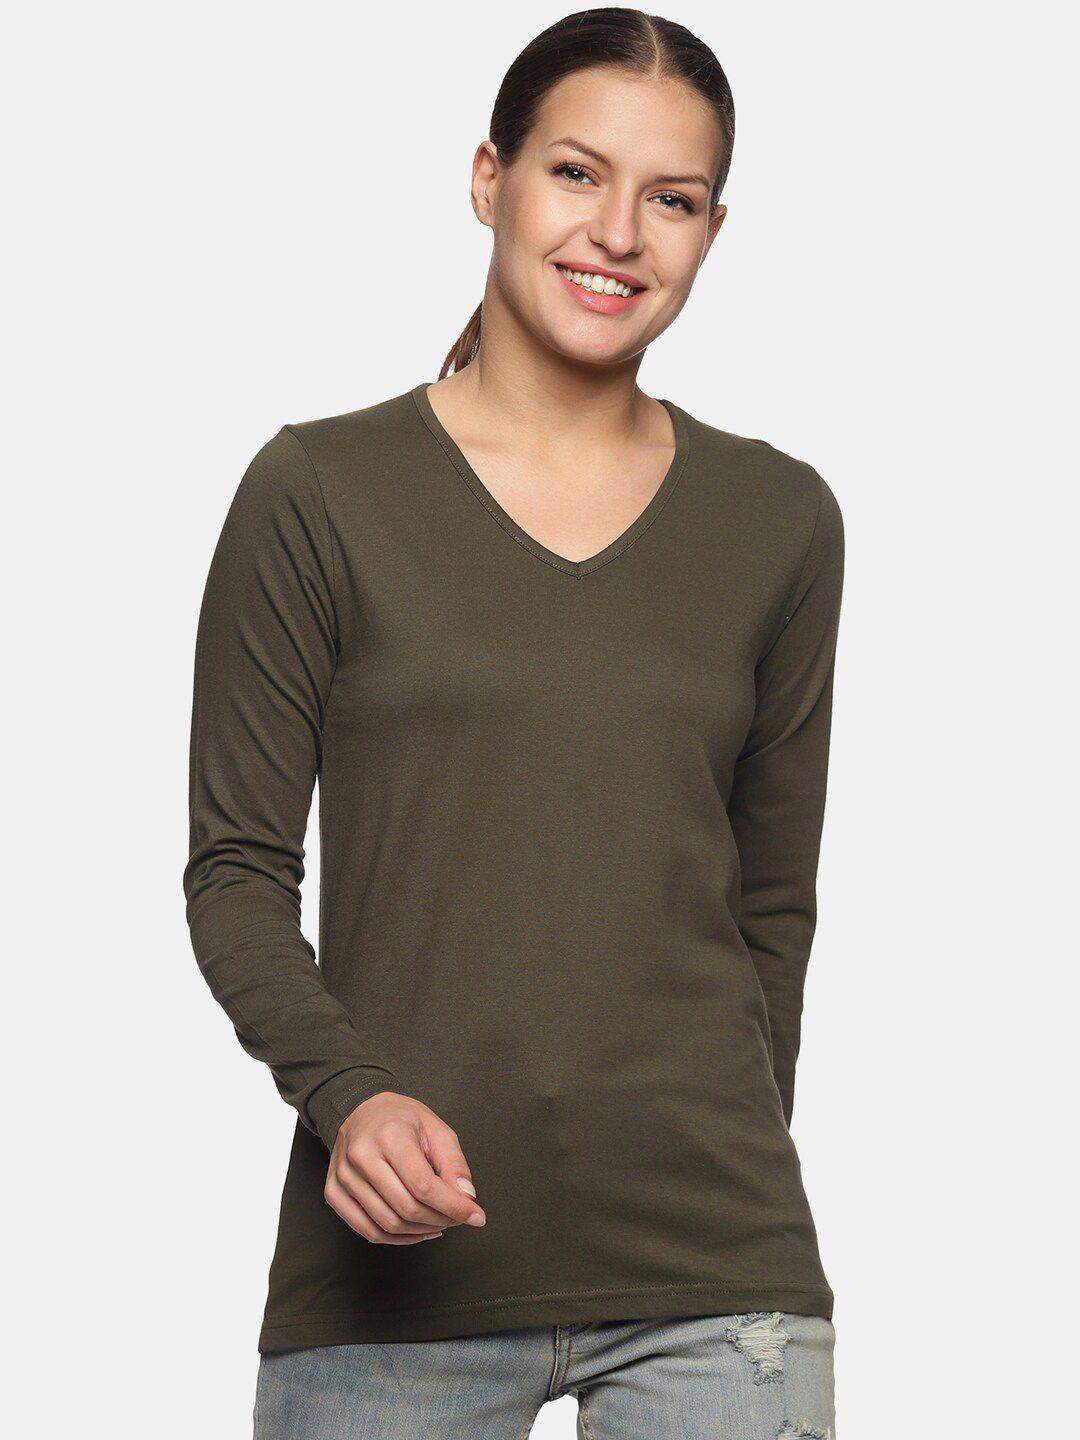 trends tower women olive green v-neck pure cotton t-shirt